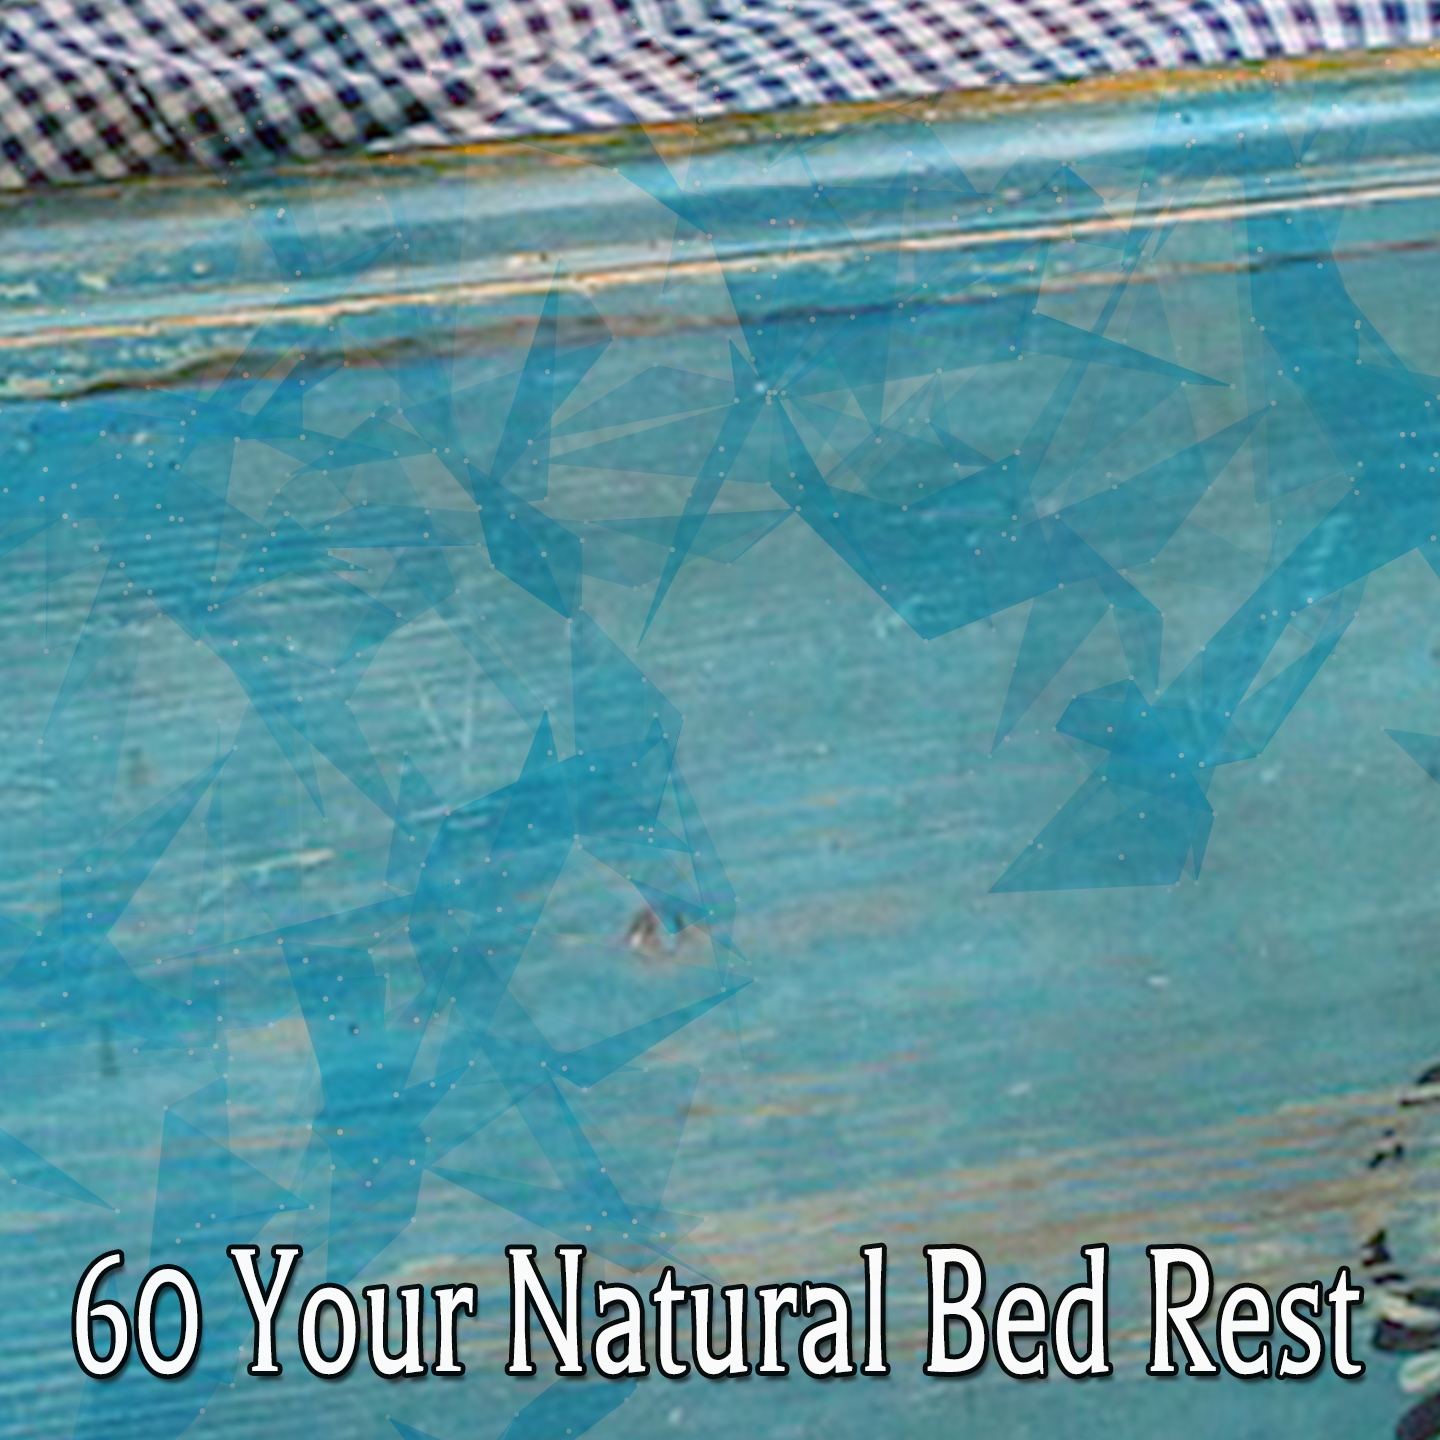 60 Your Natural Bed Rest